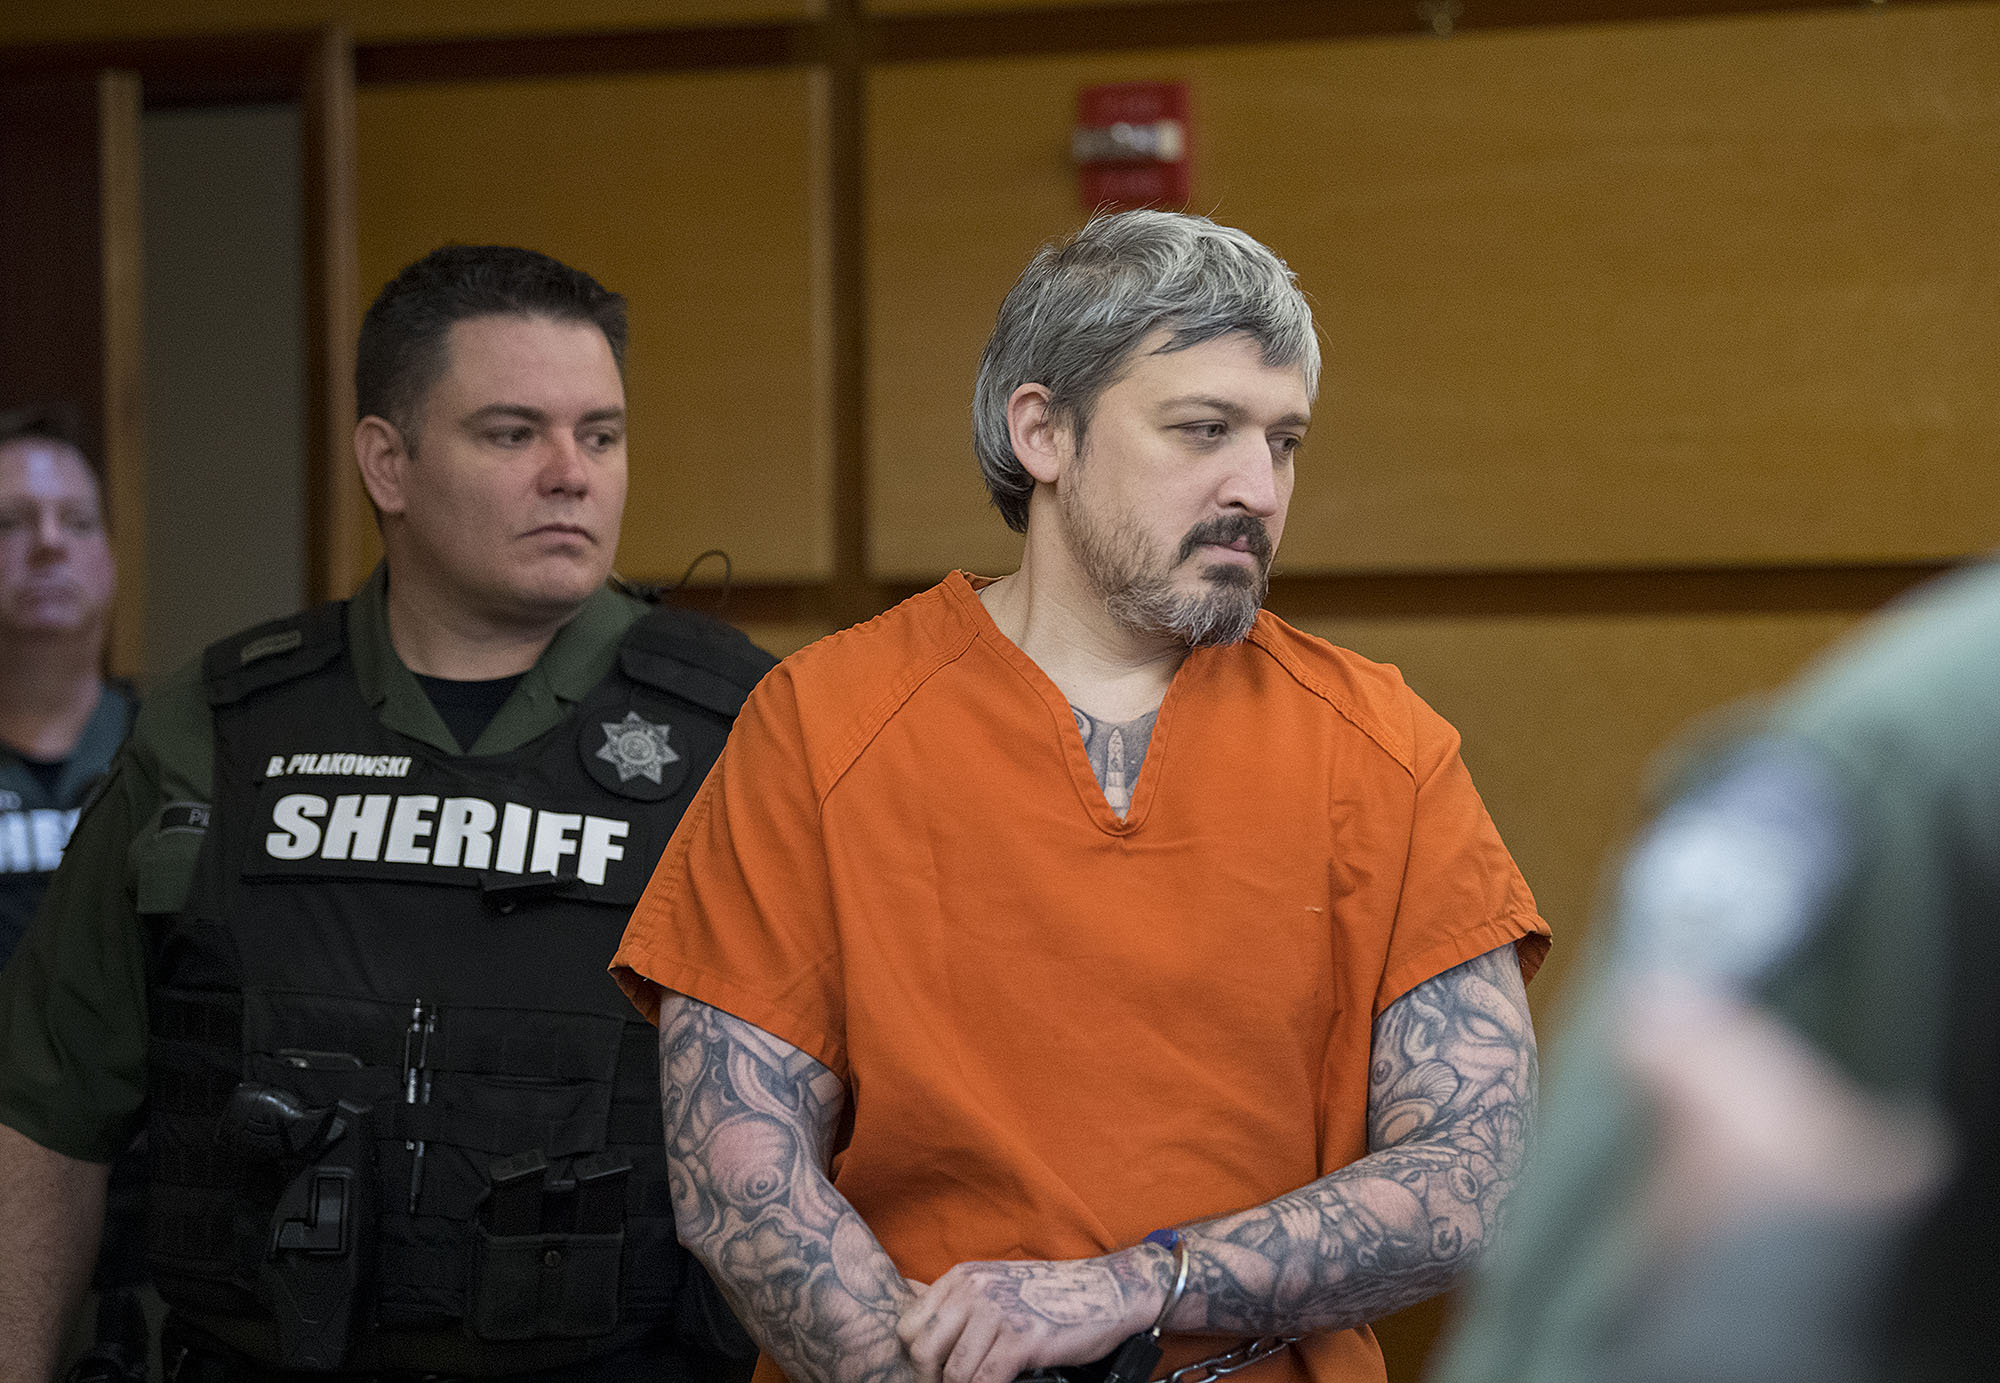 Brent Ward Luyster, who's accused in a Woodland triple-homicide in July and attempted jail escape in February, is escorted to arraignment March 6, 2017, in Clark County Superior Court. Luyster was back in court Monday morning for a review hearing, during which time his attorney requested co-counsel on the case.